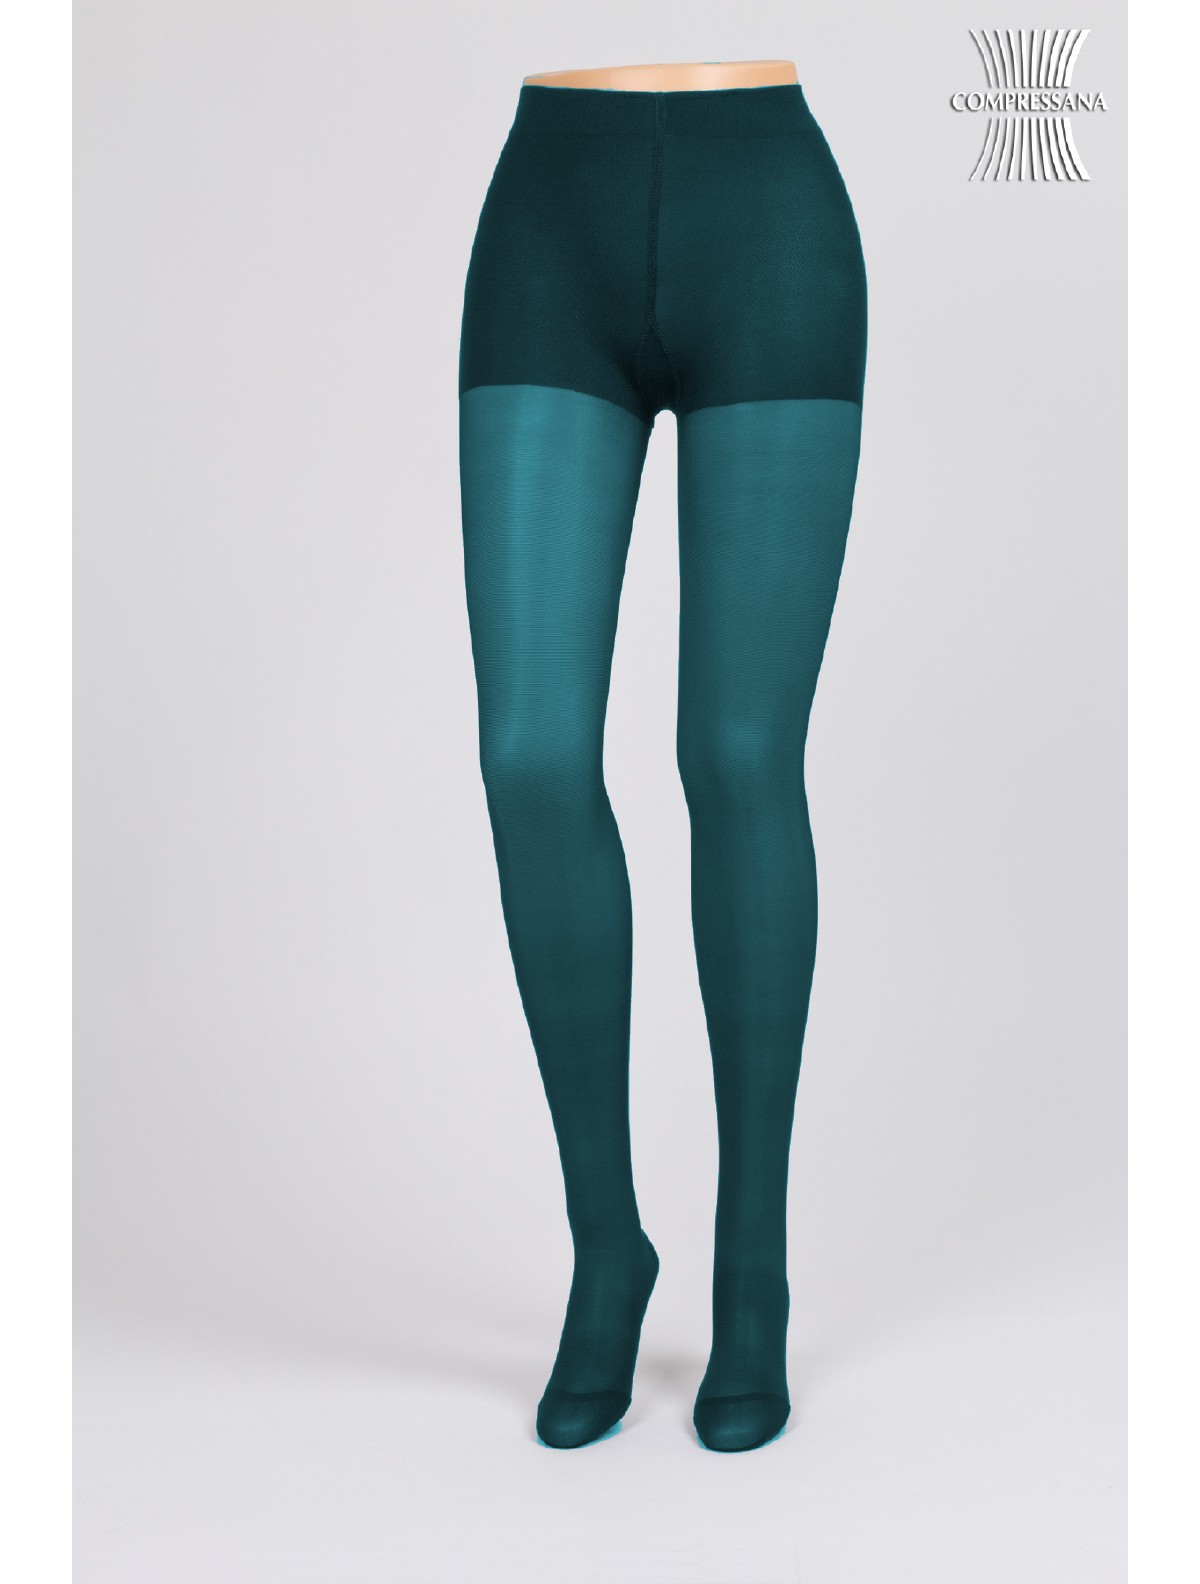 140 Tights Compressana Strong Support Calypso